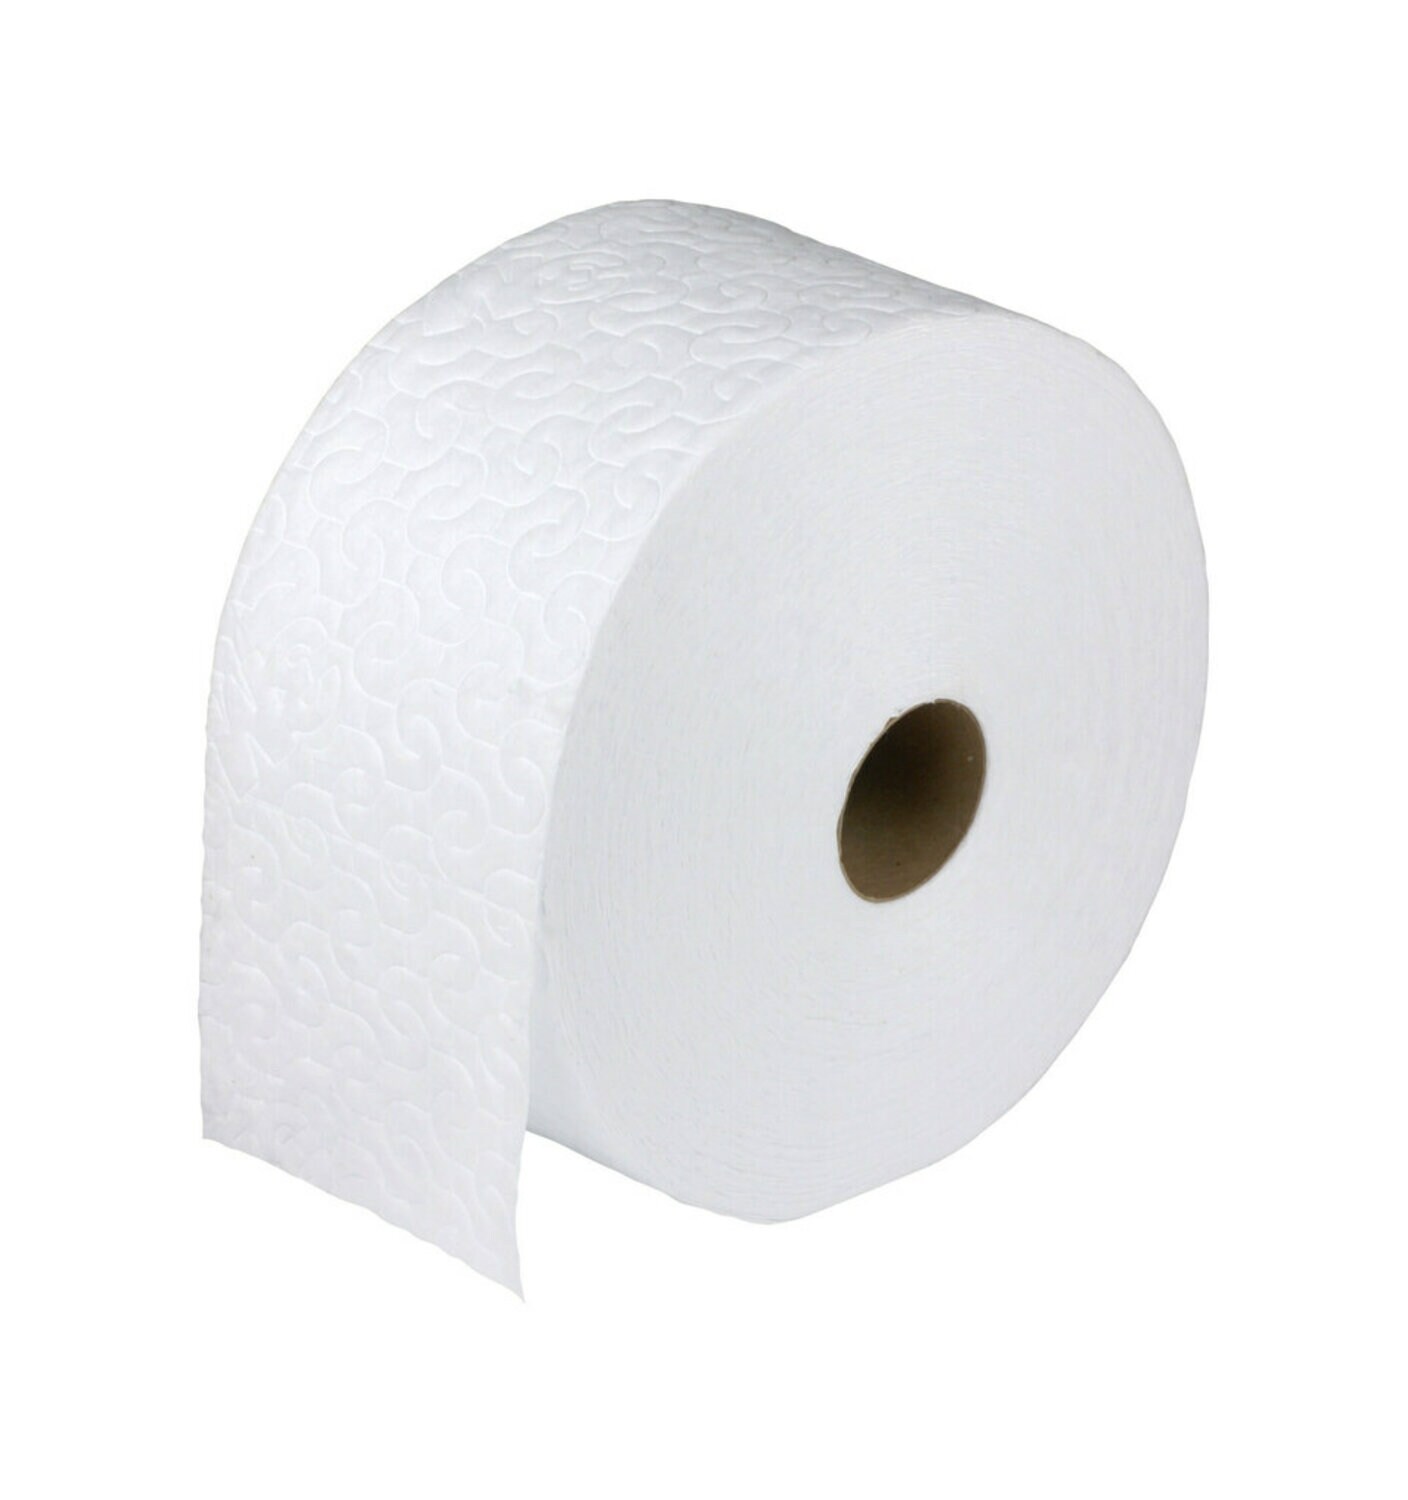 7000052519 - 3M Doodleduster Disposable Dusting Cloth 19152, White, 7 in x 13.8 in x 287.5 ft, 250 Sheets/Roll, 1 Roll/Case